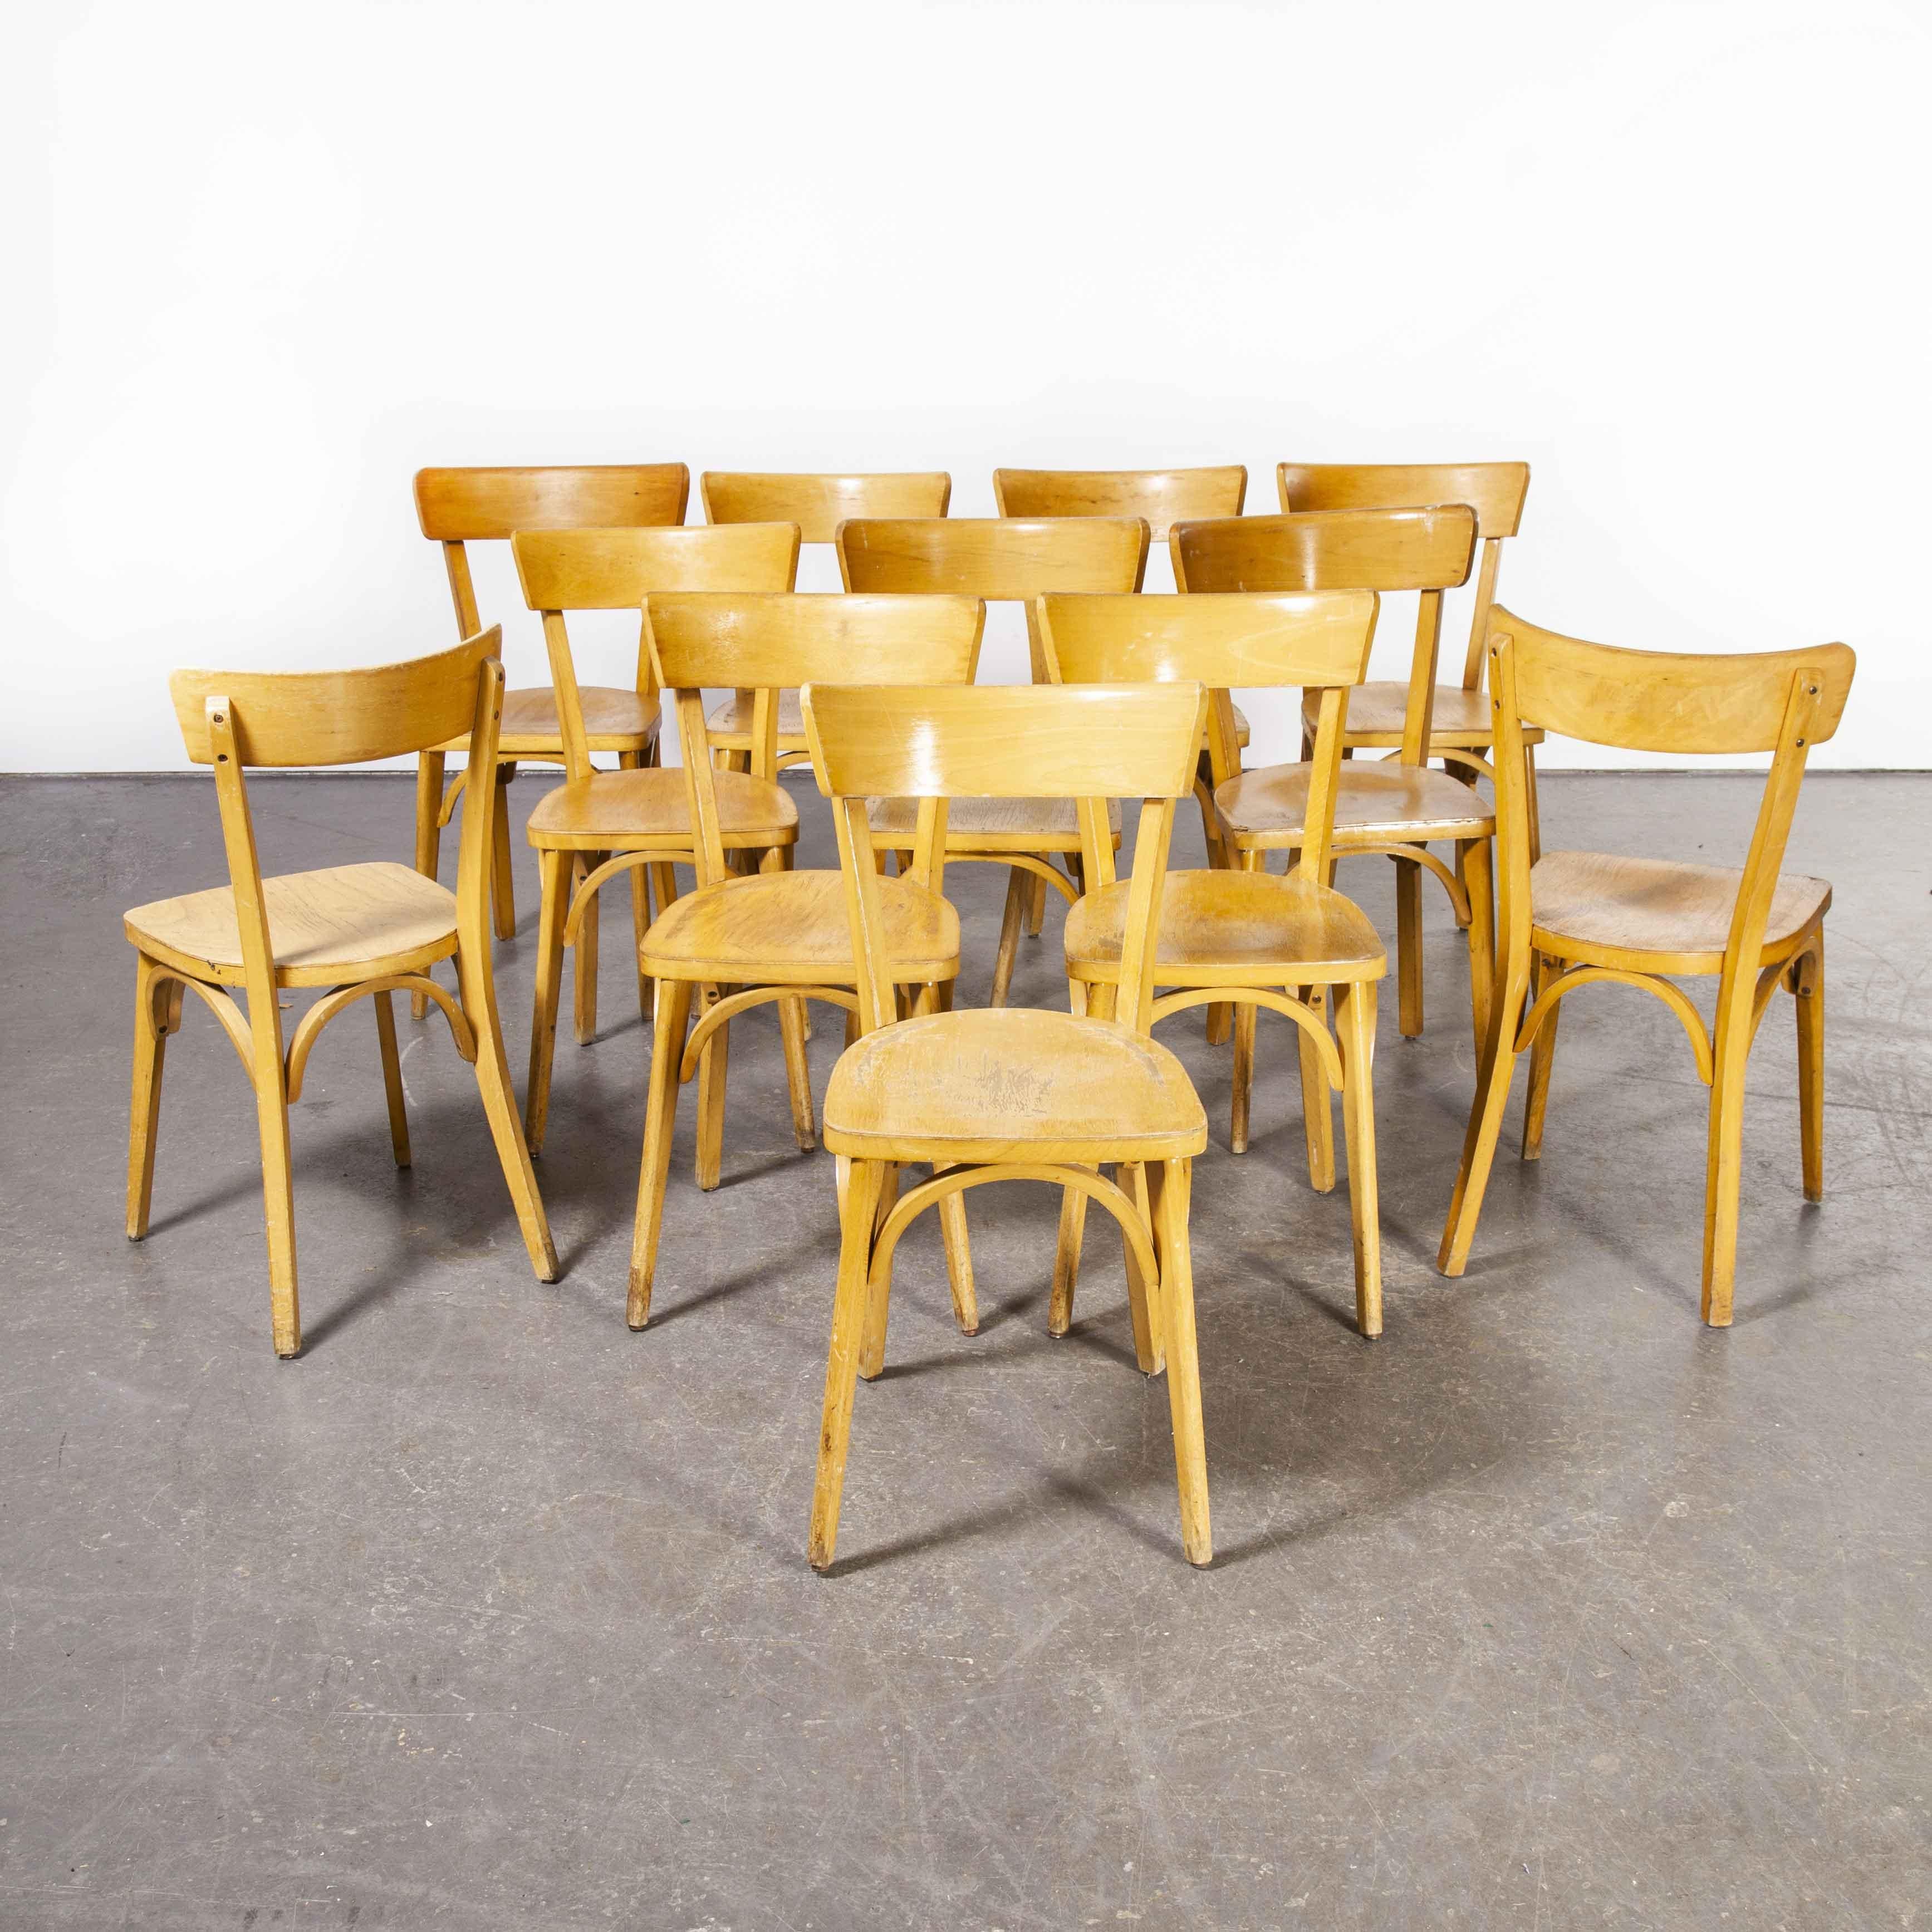 1950's French Made Luterma Bentwood Dining Chairs, Set of Twelve 'Model OB' For Sale 7